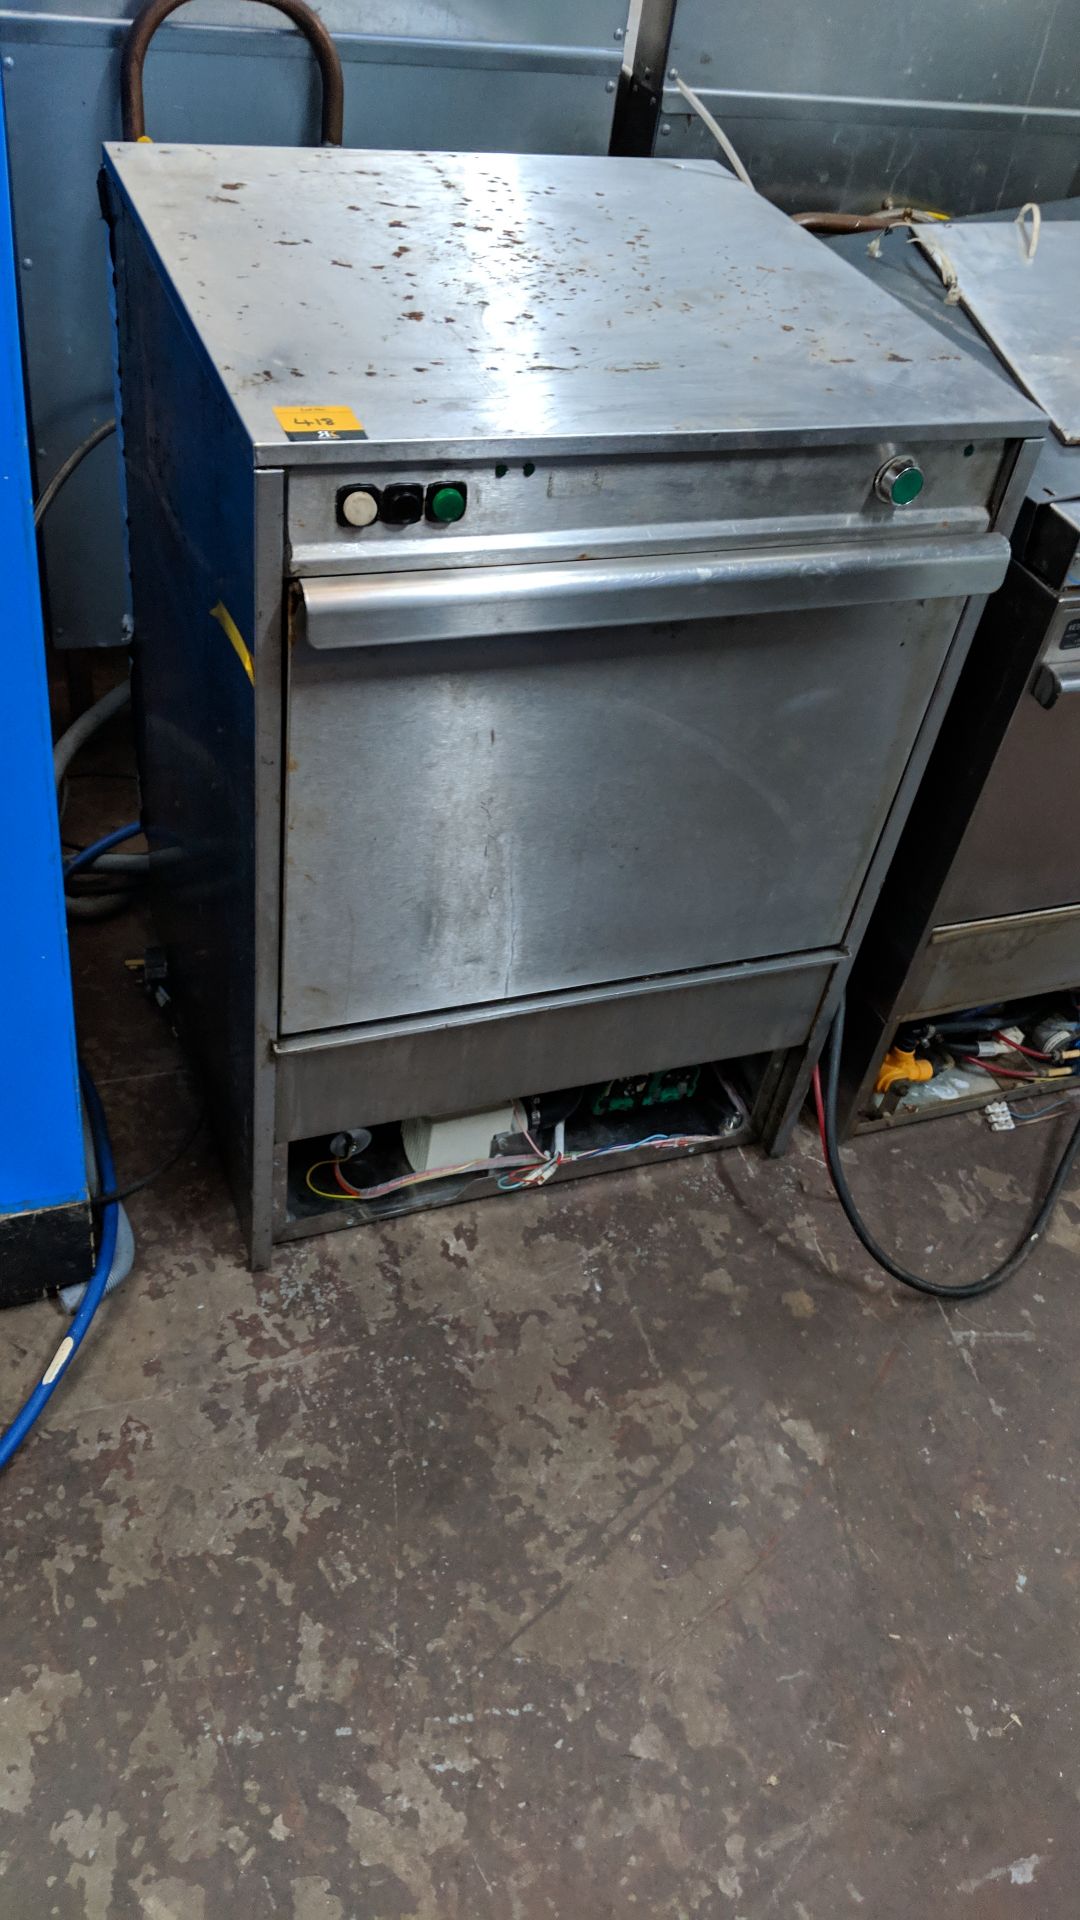 Stainless steel glasswasher IMPORTANT: Please remember goods successfully bid upon must be paid